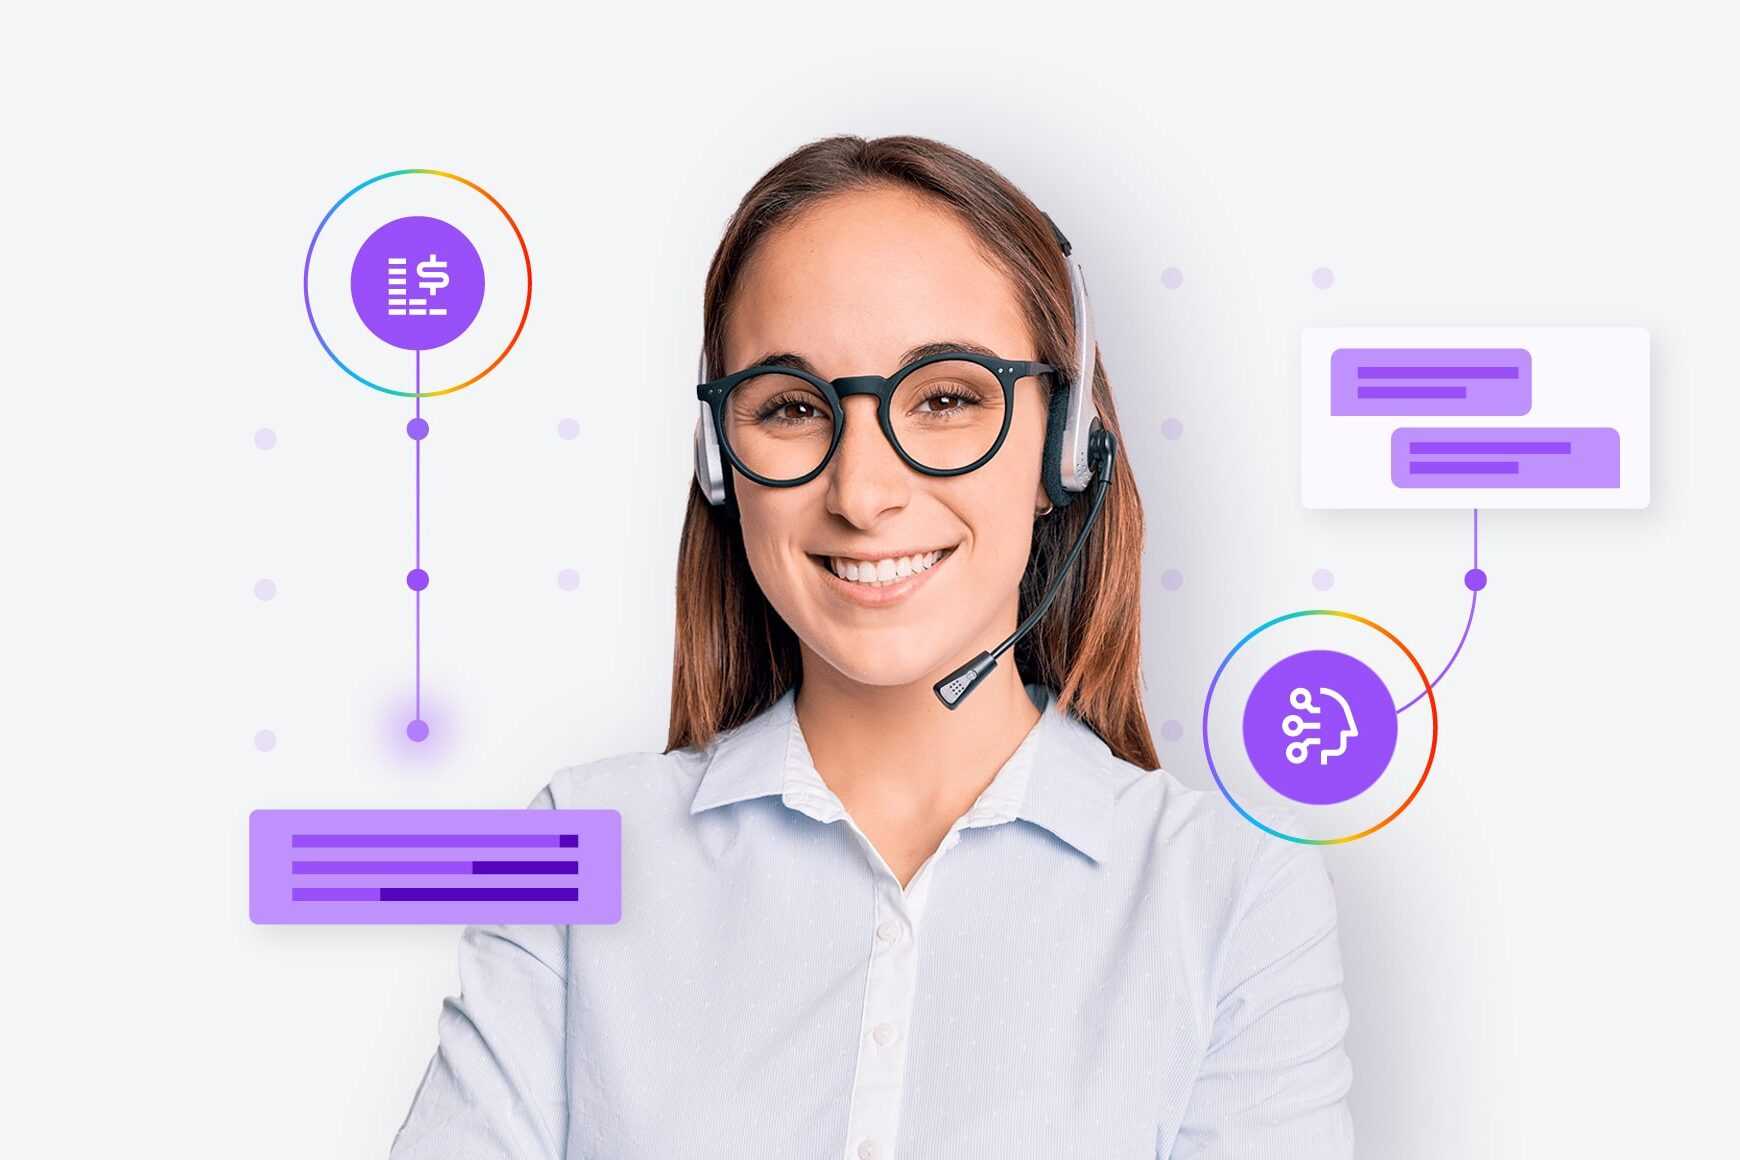 Contact centre masterclass: How to maximise ROI with Conversational AI